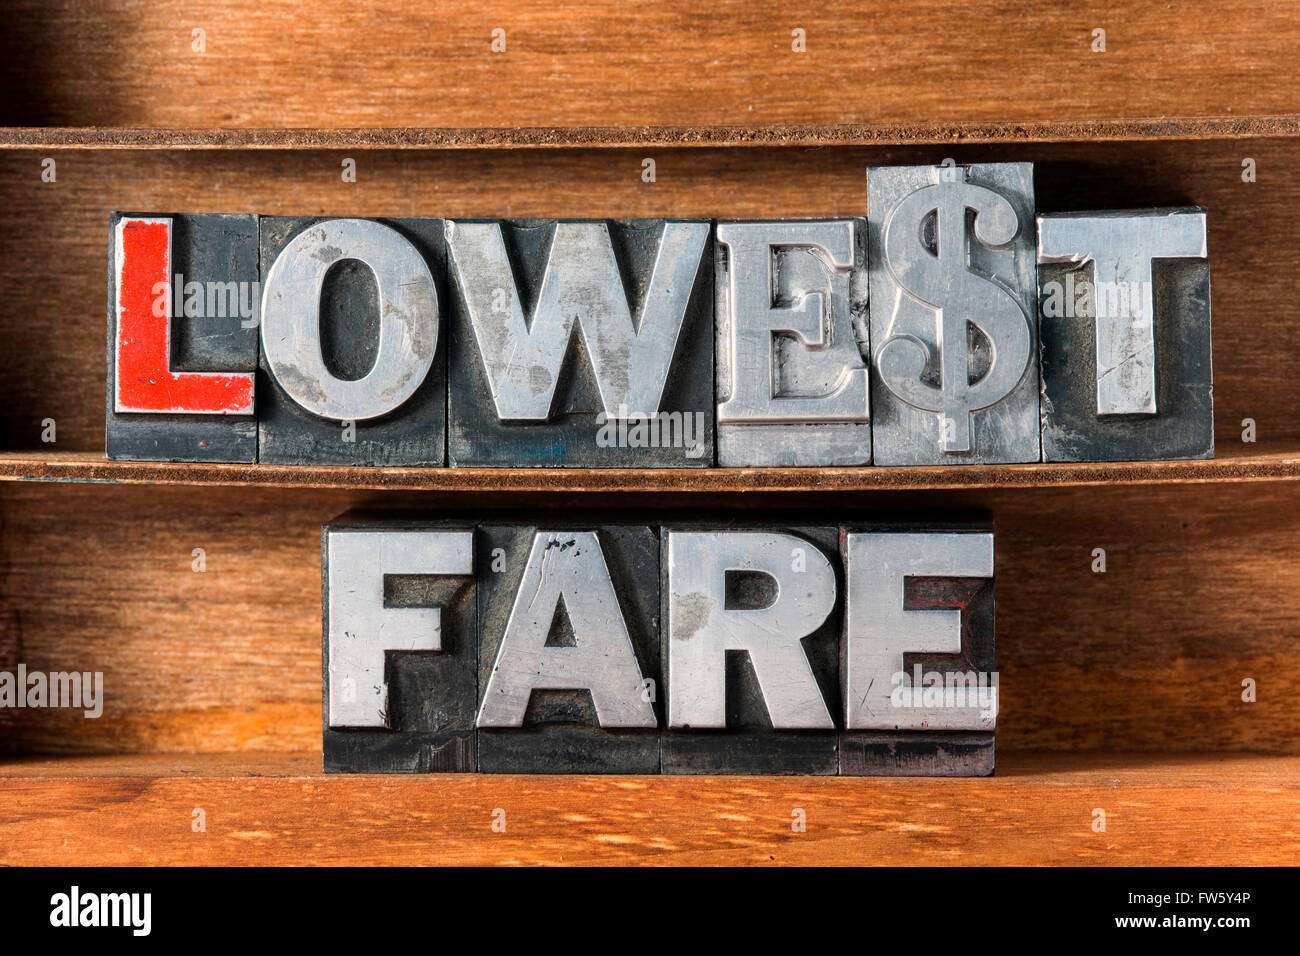 lowest fare phrase made from metallic letterpress type on wooden tray Stock Photo